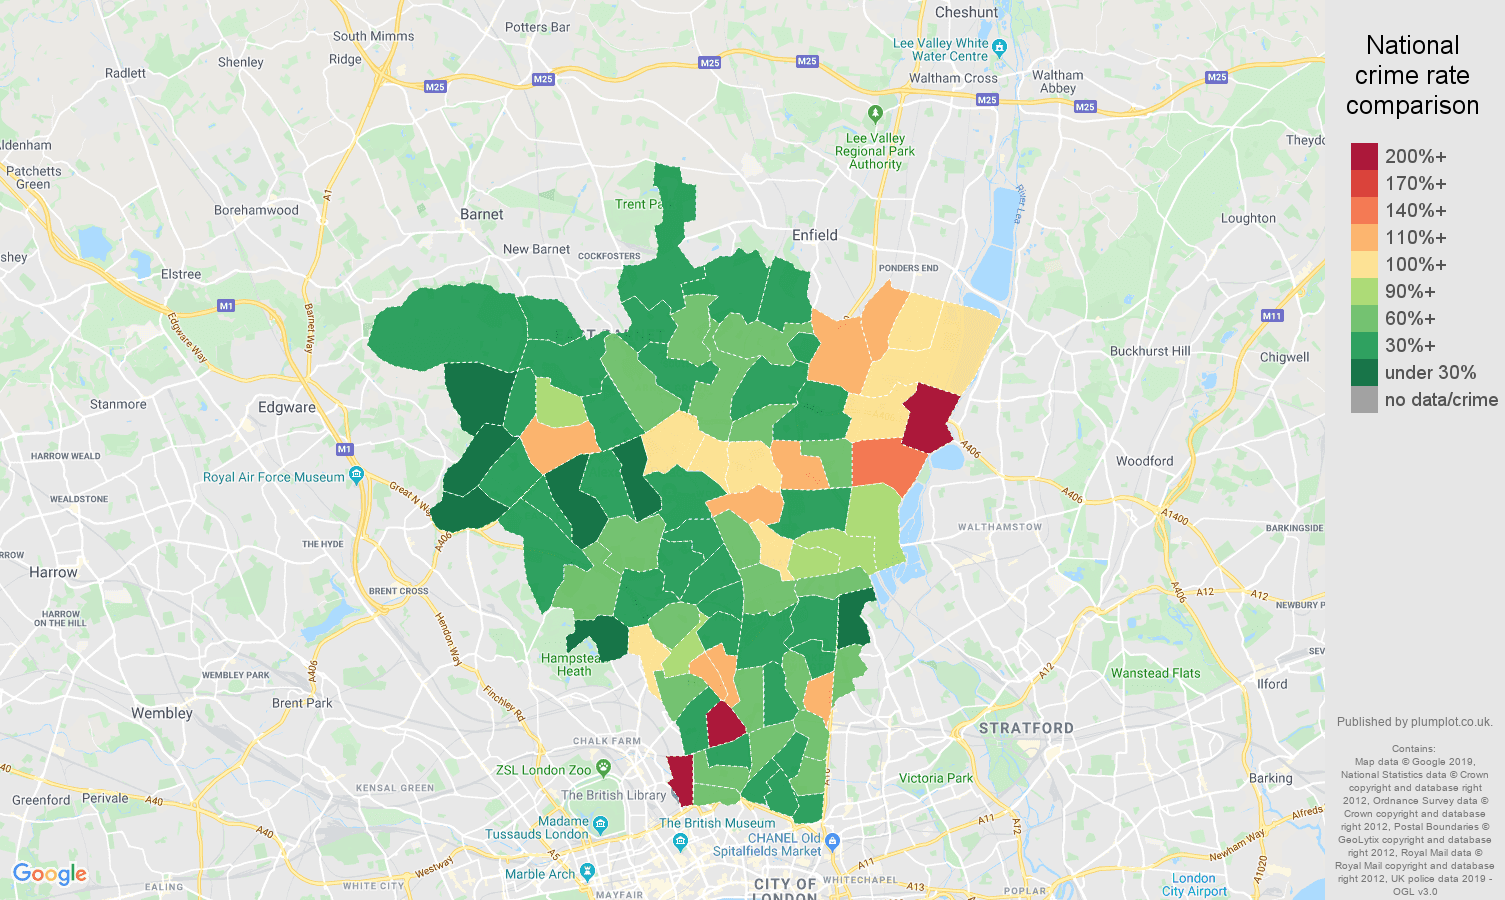 North London other crime rate comparison map